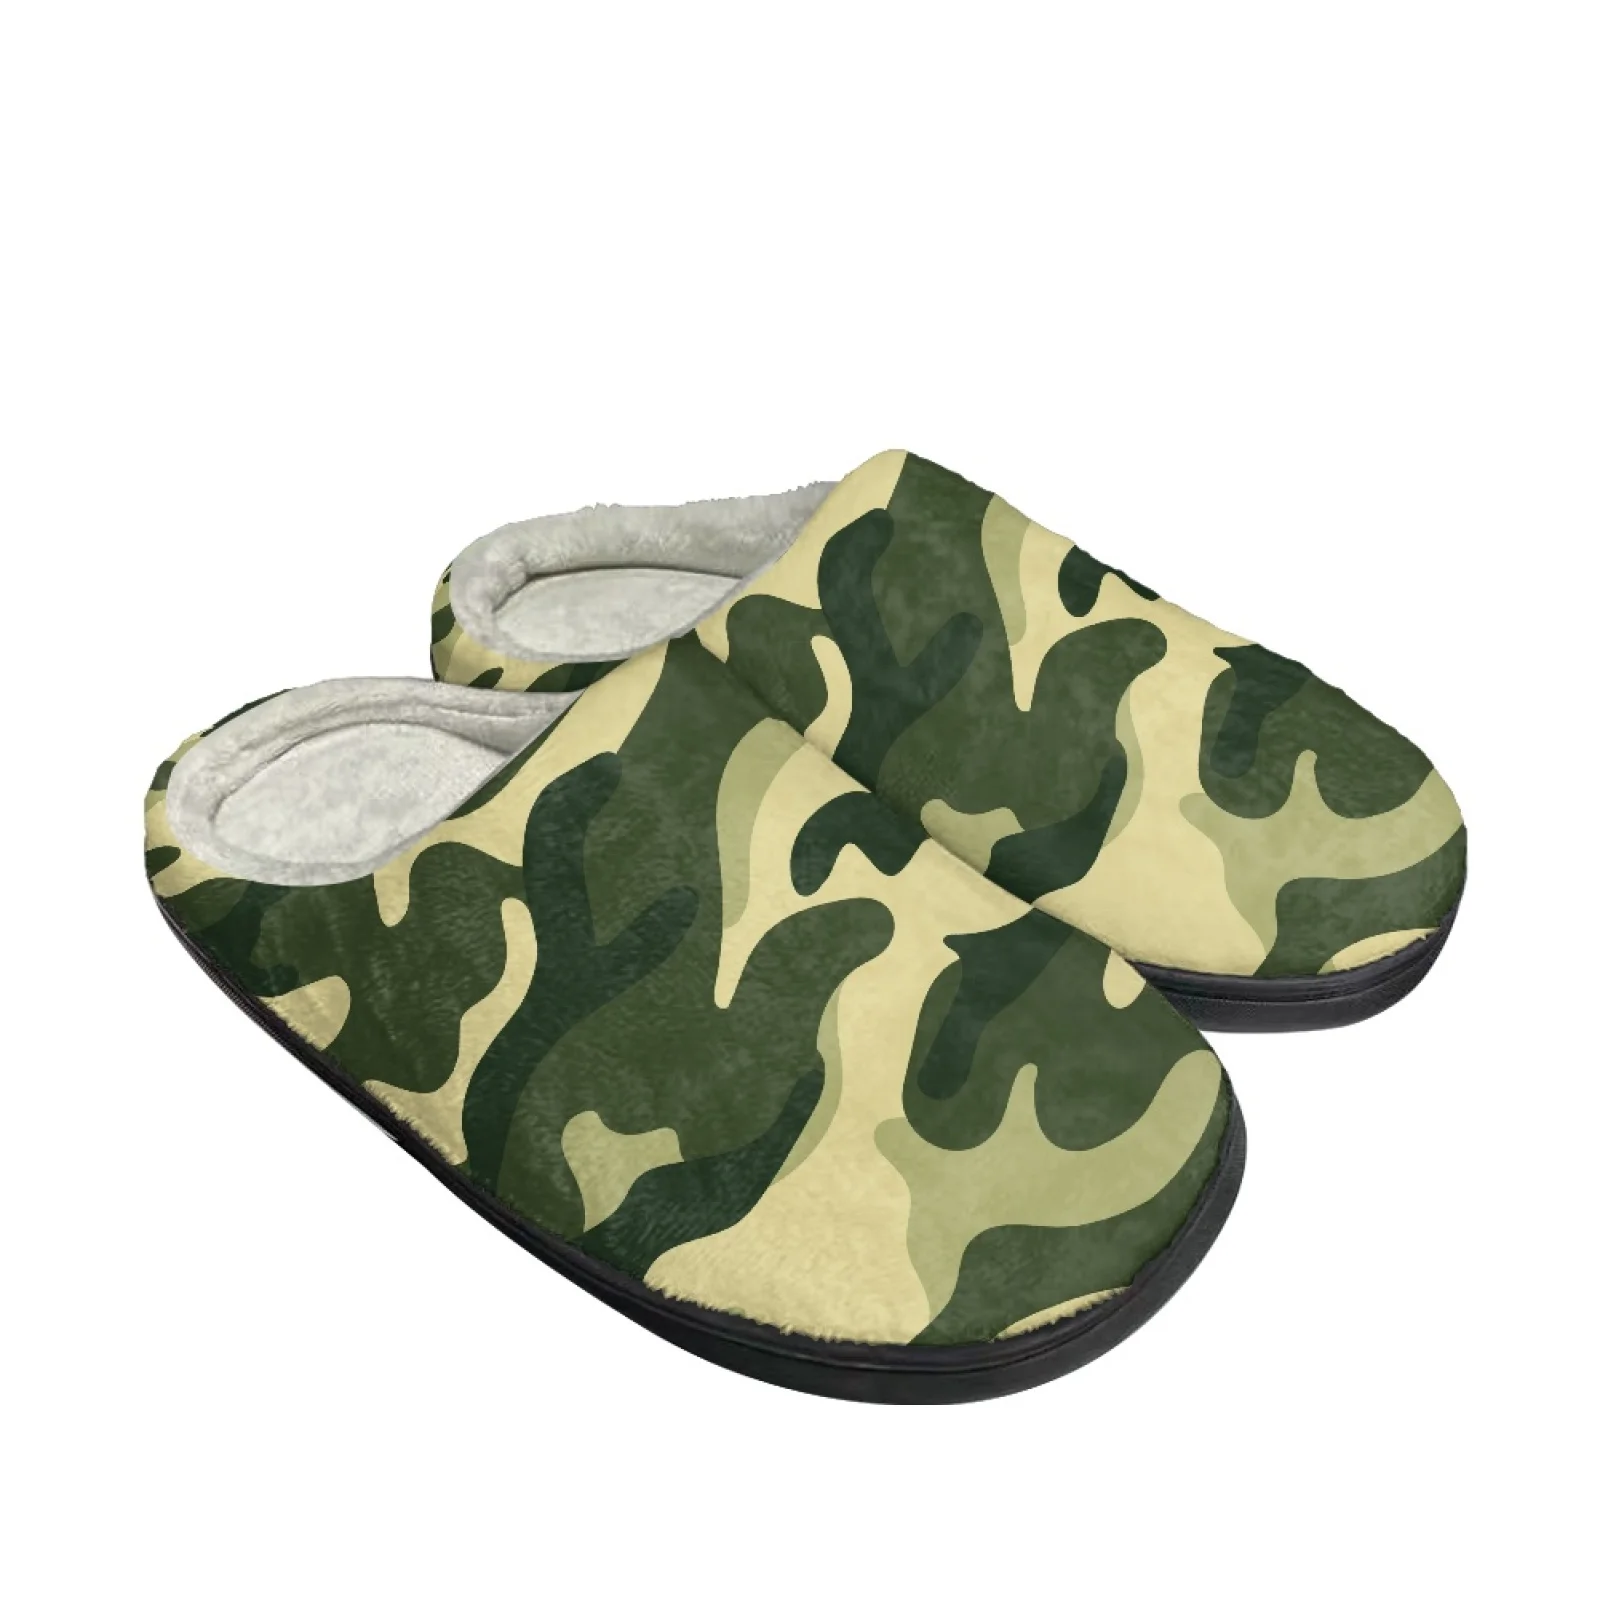 

Household Lightweight Unisex Green Camouflage Cotton Slippers Comfortable Keep Warm Flannel Upper Indoor Non-Slip TPR Soft Sole